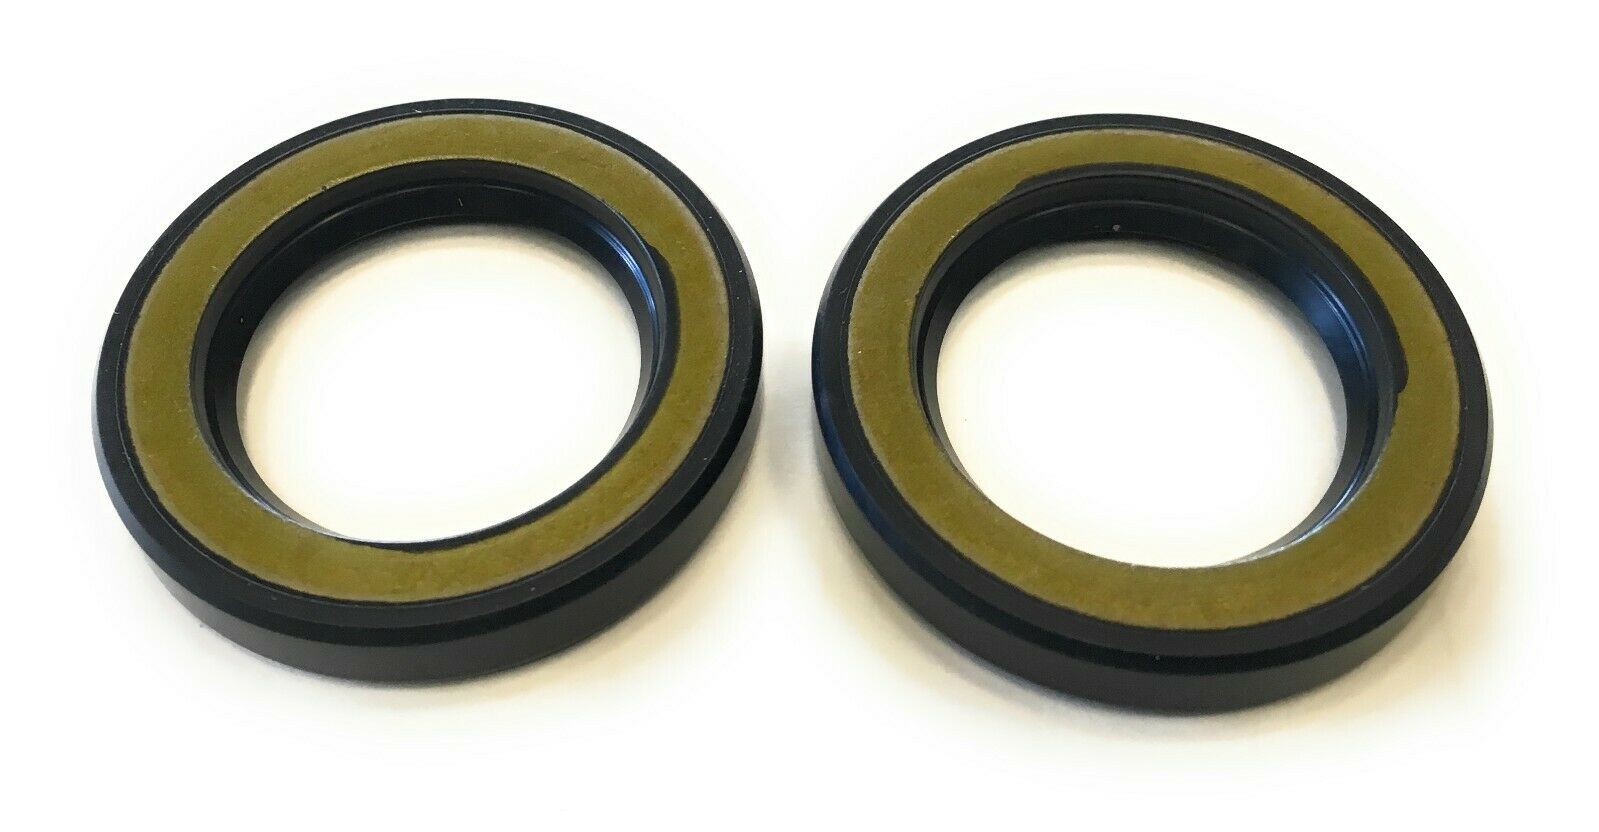 2pc Yamaha Water Pump Oil Seals 1984 & Up 115 - 300hp Replaces 93101-28m16-00